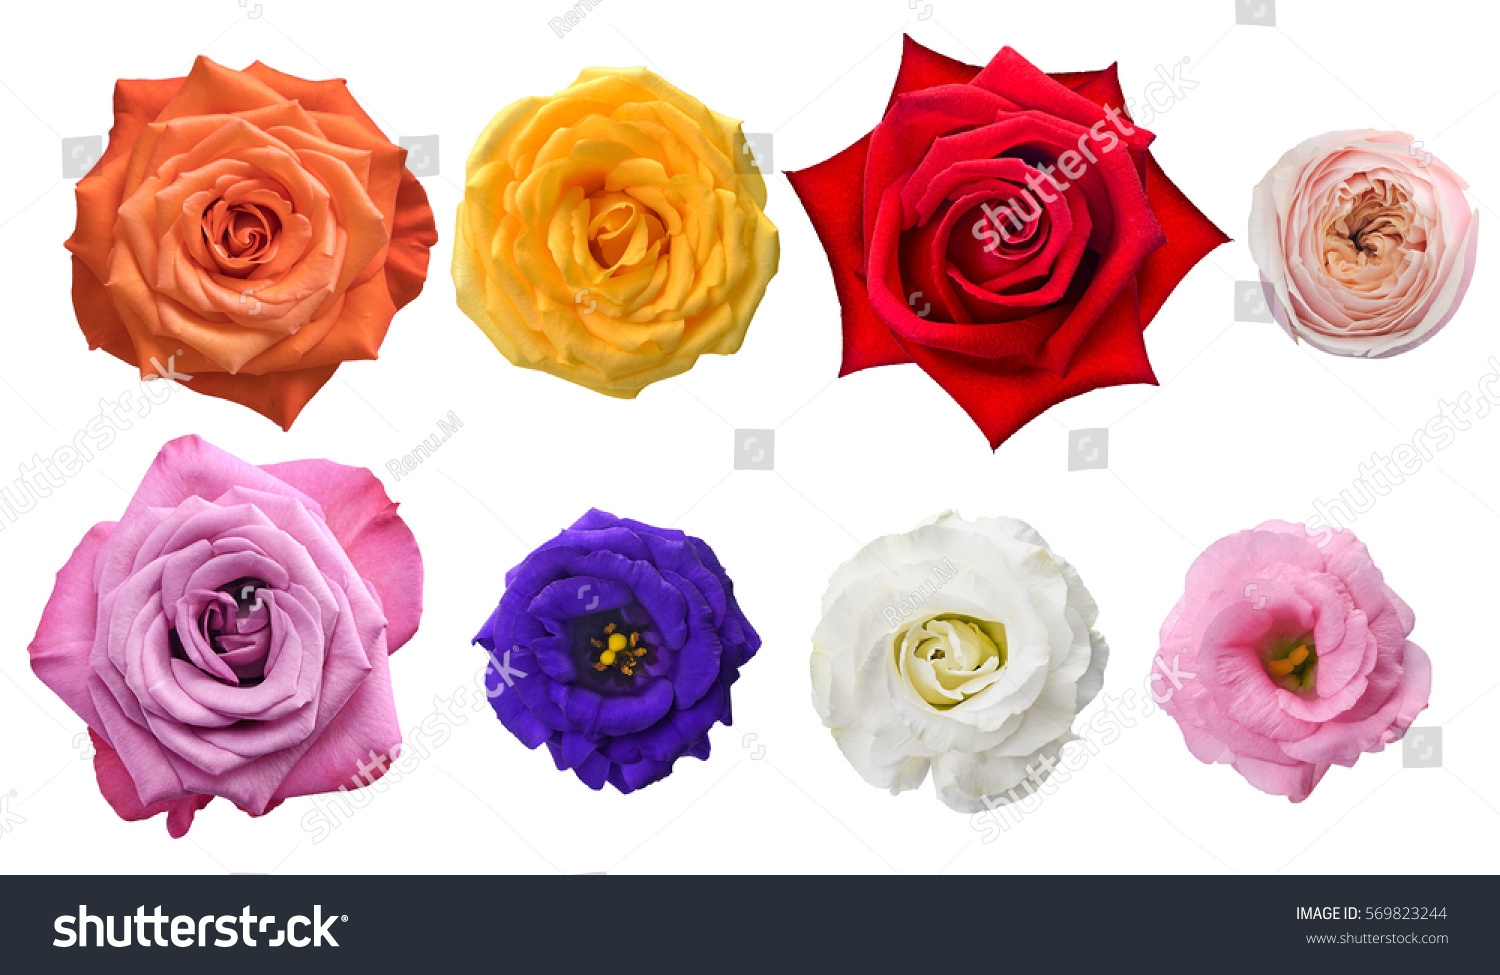 Flowers Colors And Their Meaning